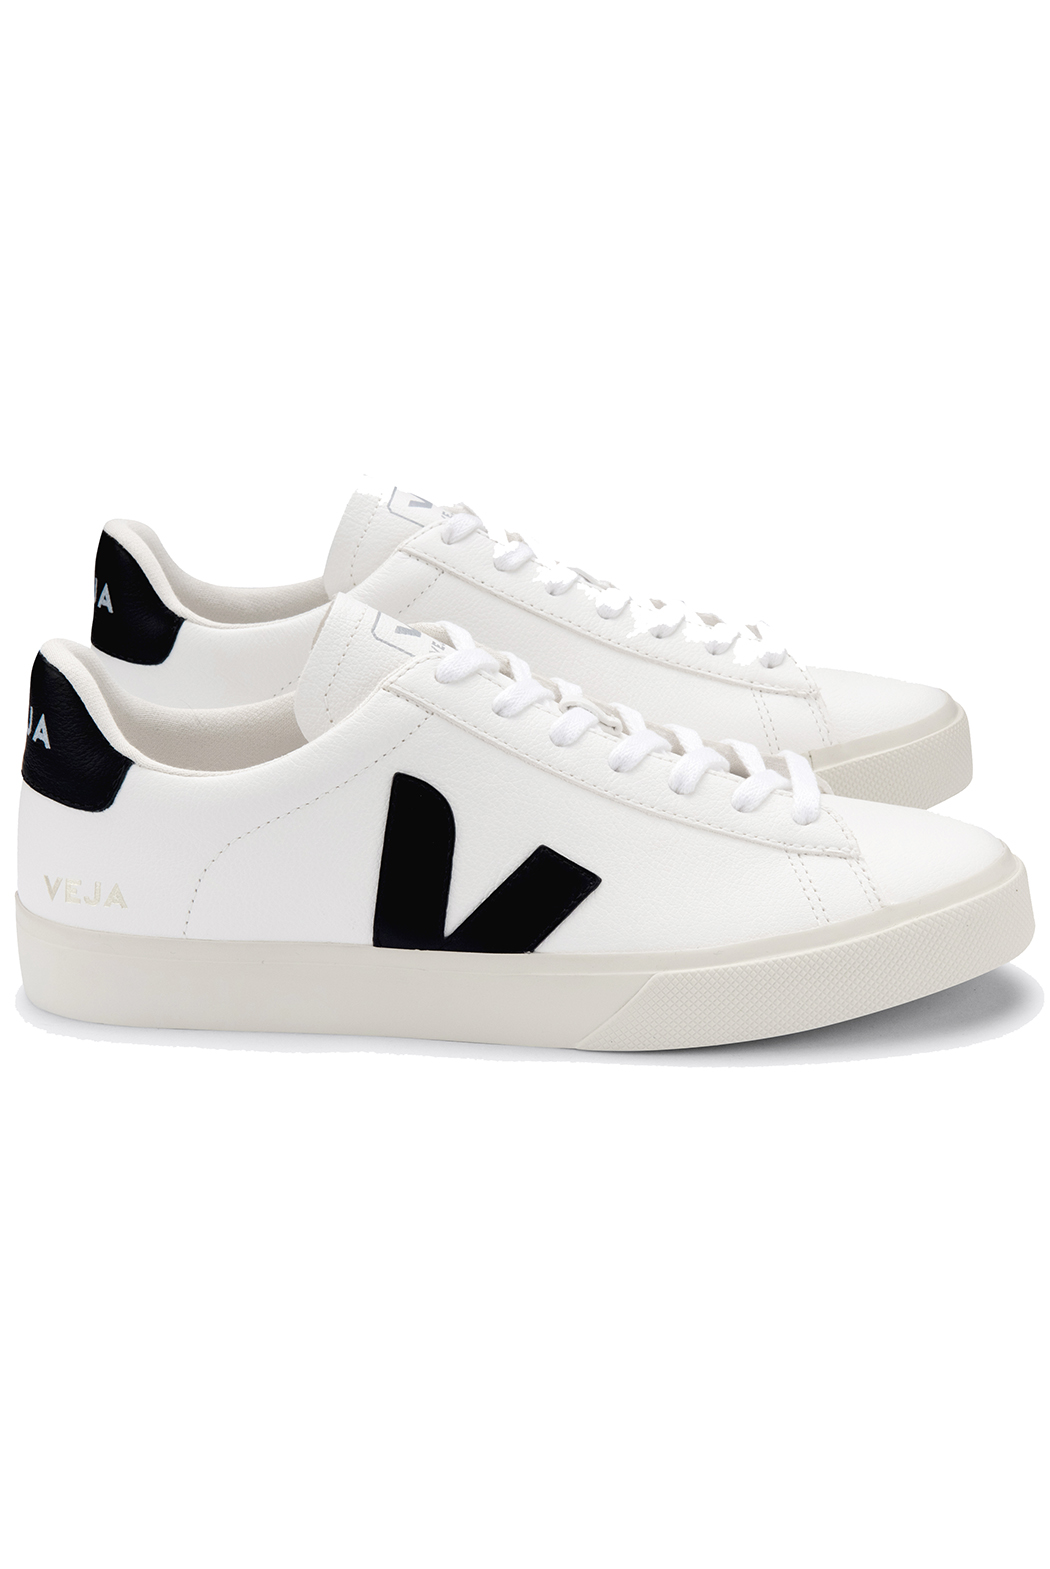 Veja Campo Chrome Free Leather Trainers White Black